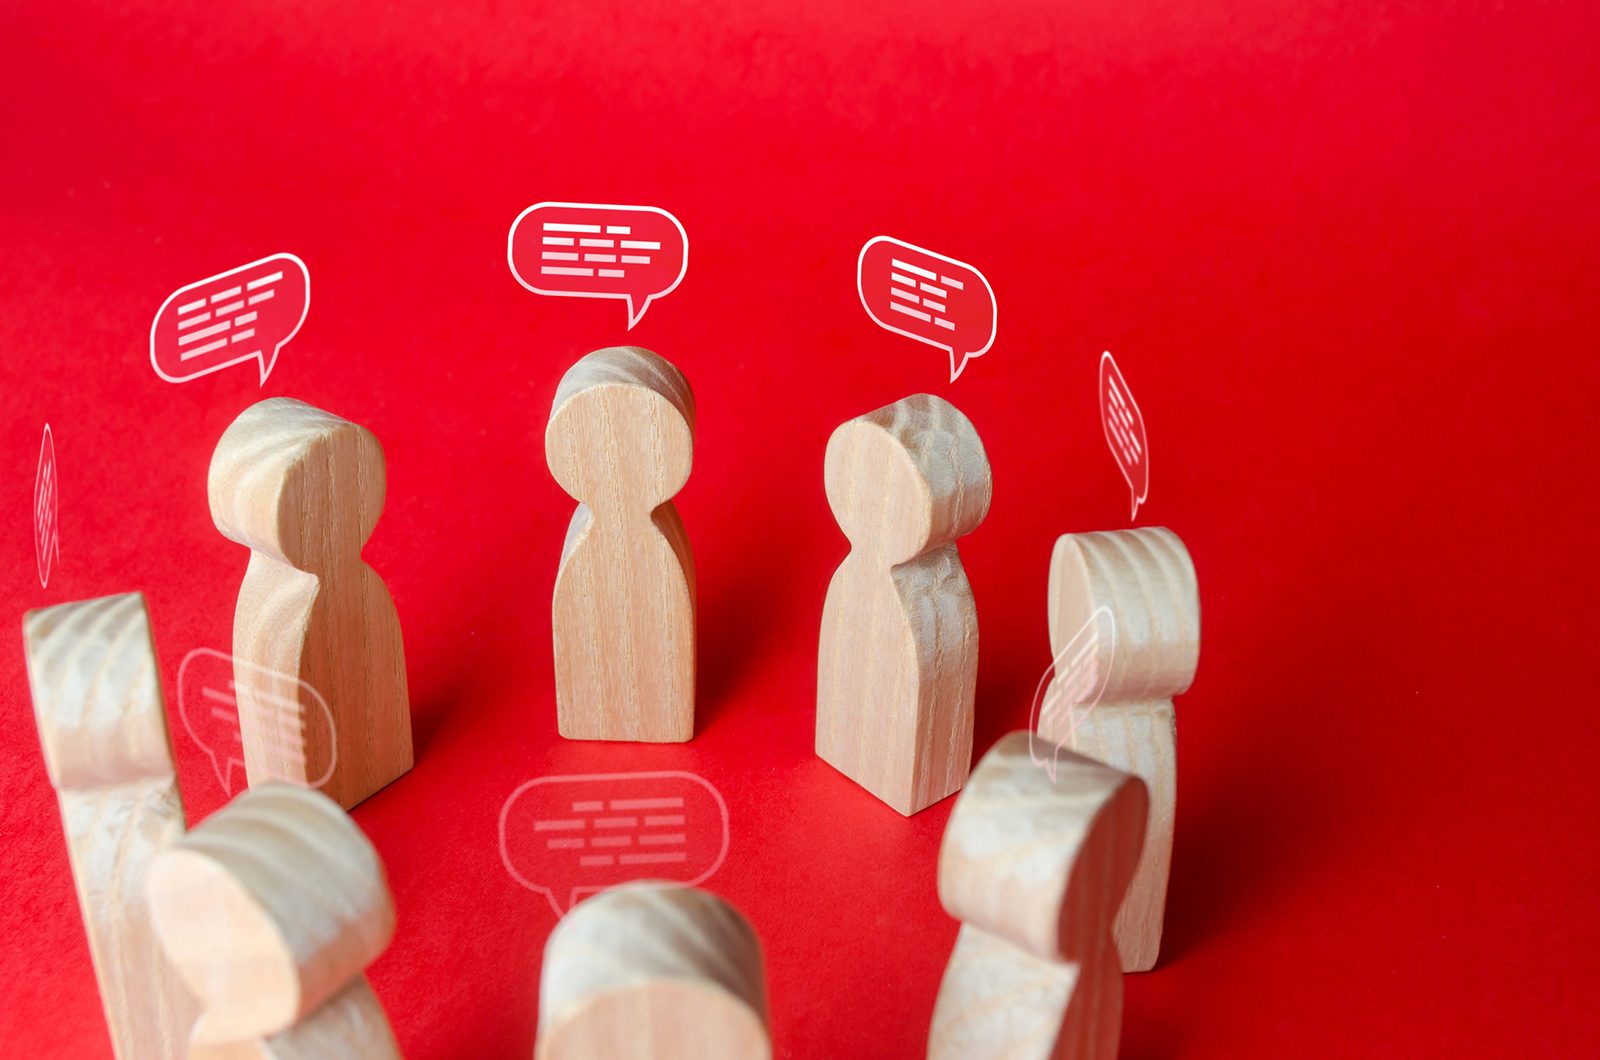 Eight wooded peg people form a circle. Illustrated white speech bubbles are over their heads, suggesting they are having a group discussion.